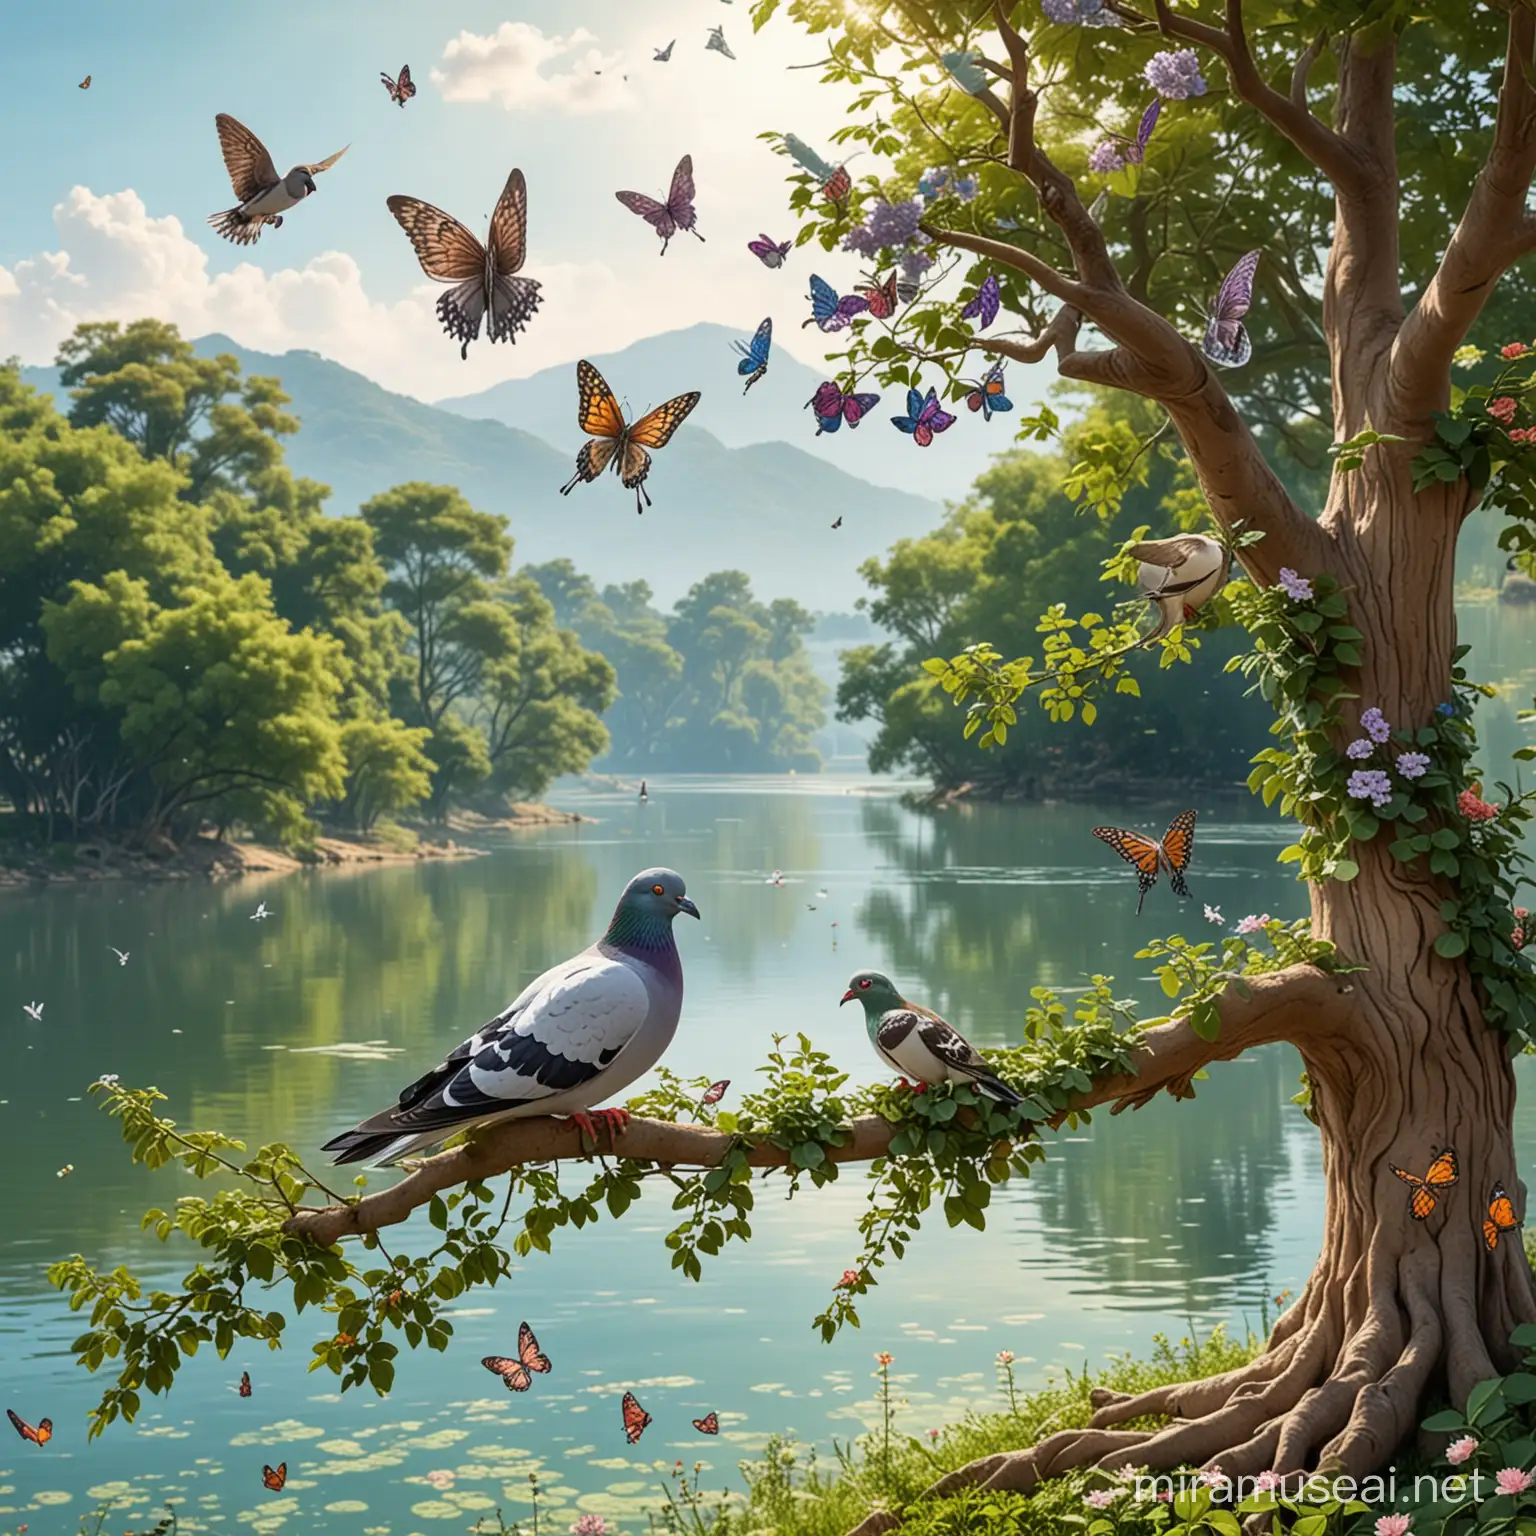 Tranquil Scene Pigeons Resting on Tree by Serene Lake Amidst Lush Greenery and Fluttering Butterflies